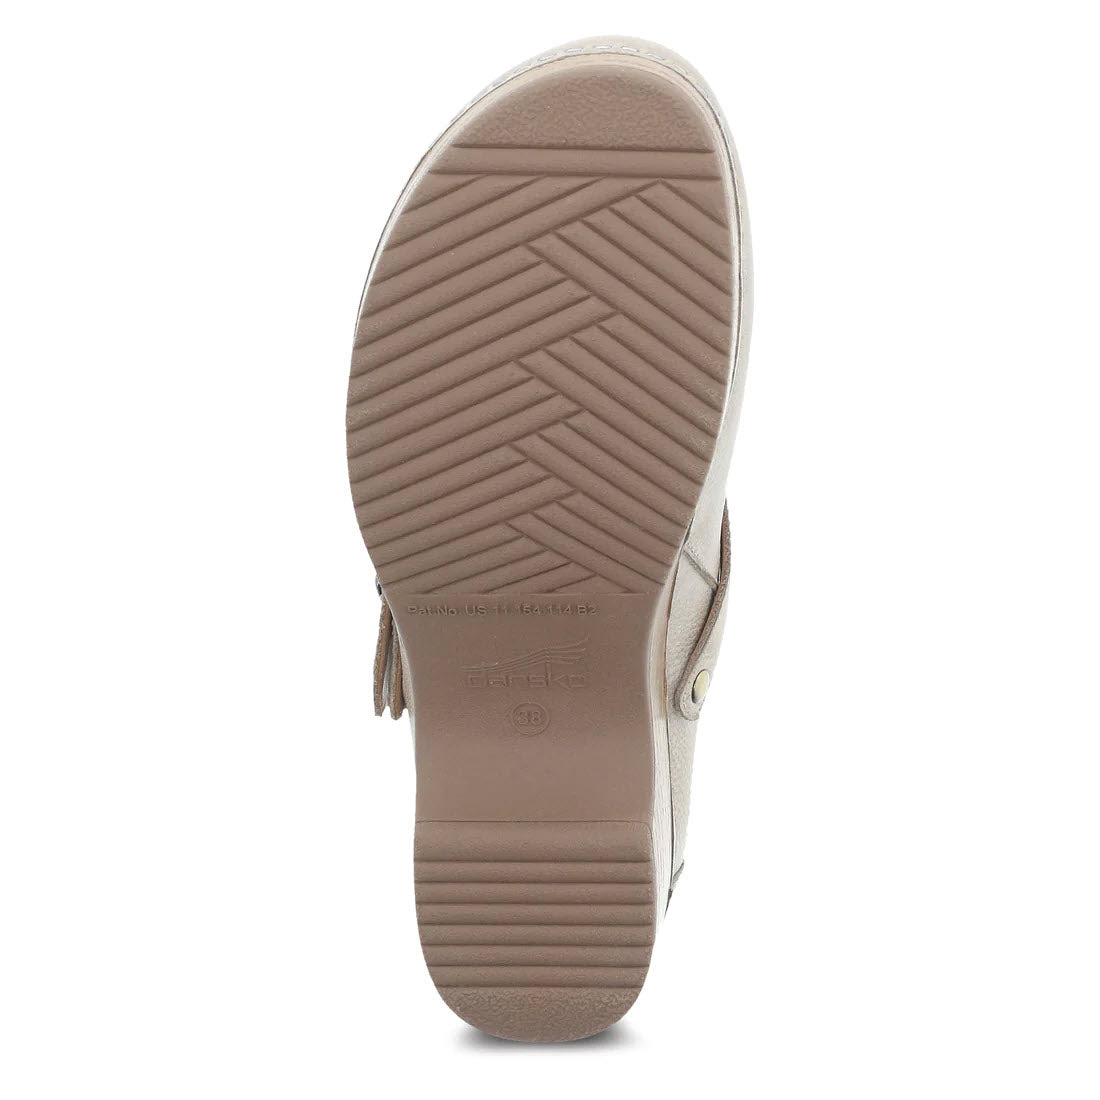 Bottom view of a Dansko tan leather mule showing a textured sole and embossed brand logo.